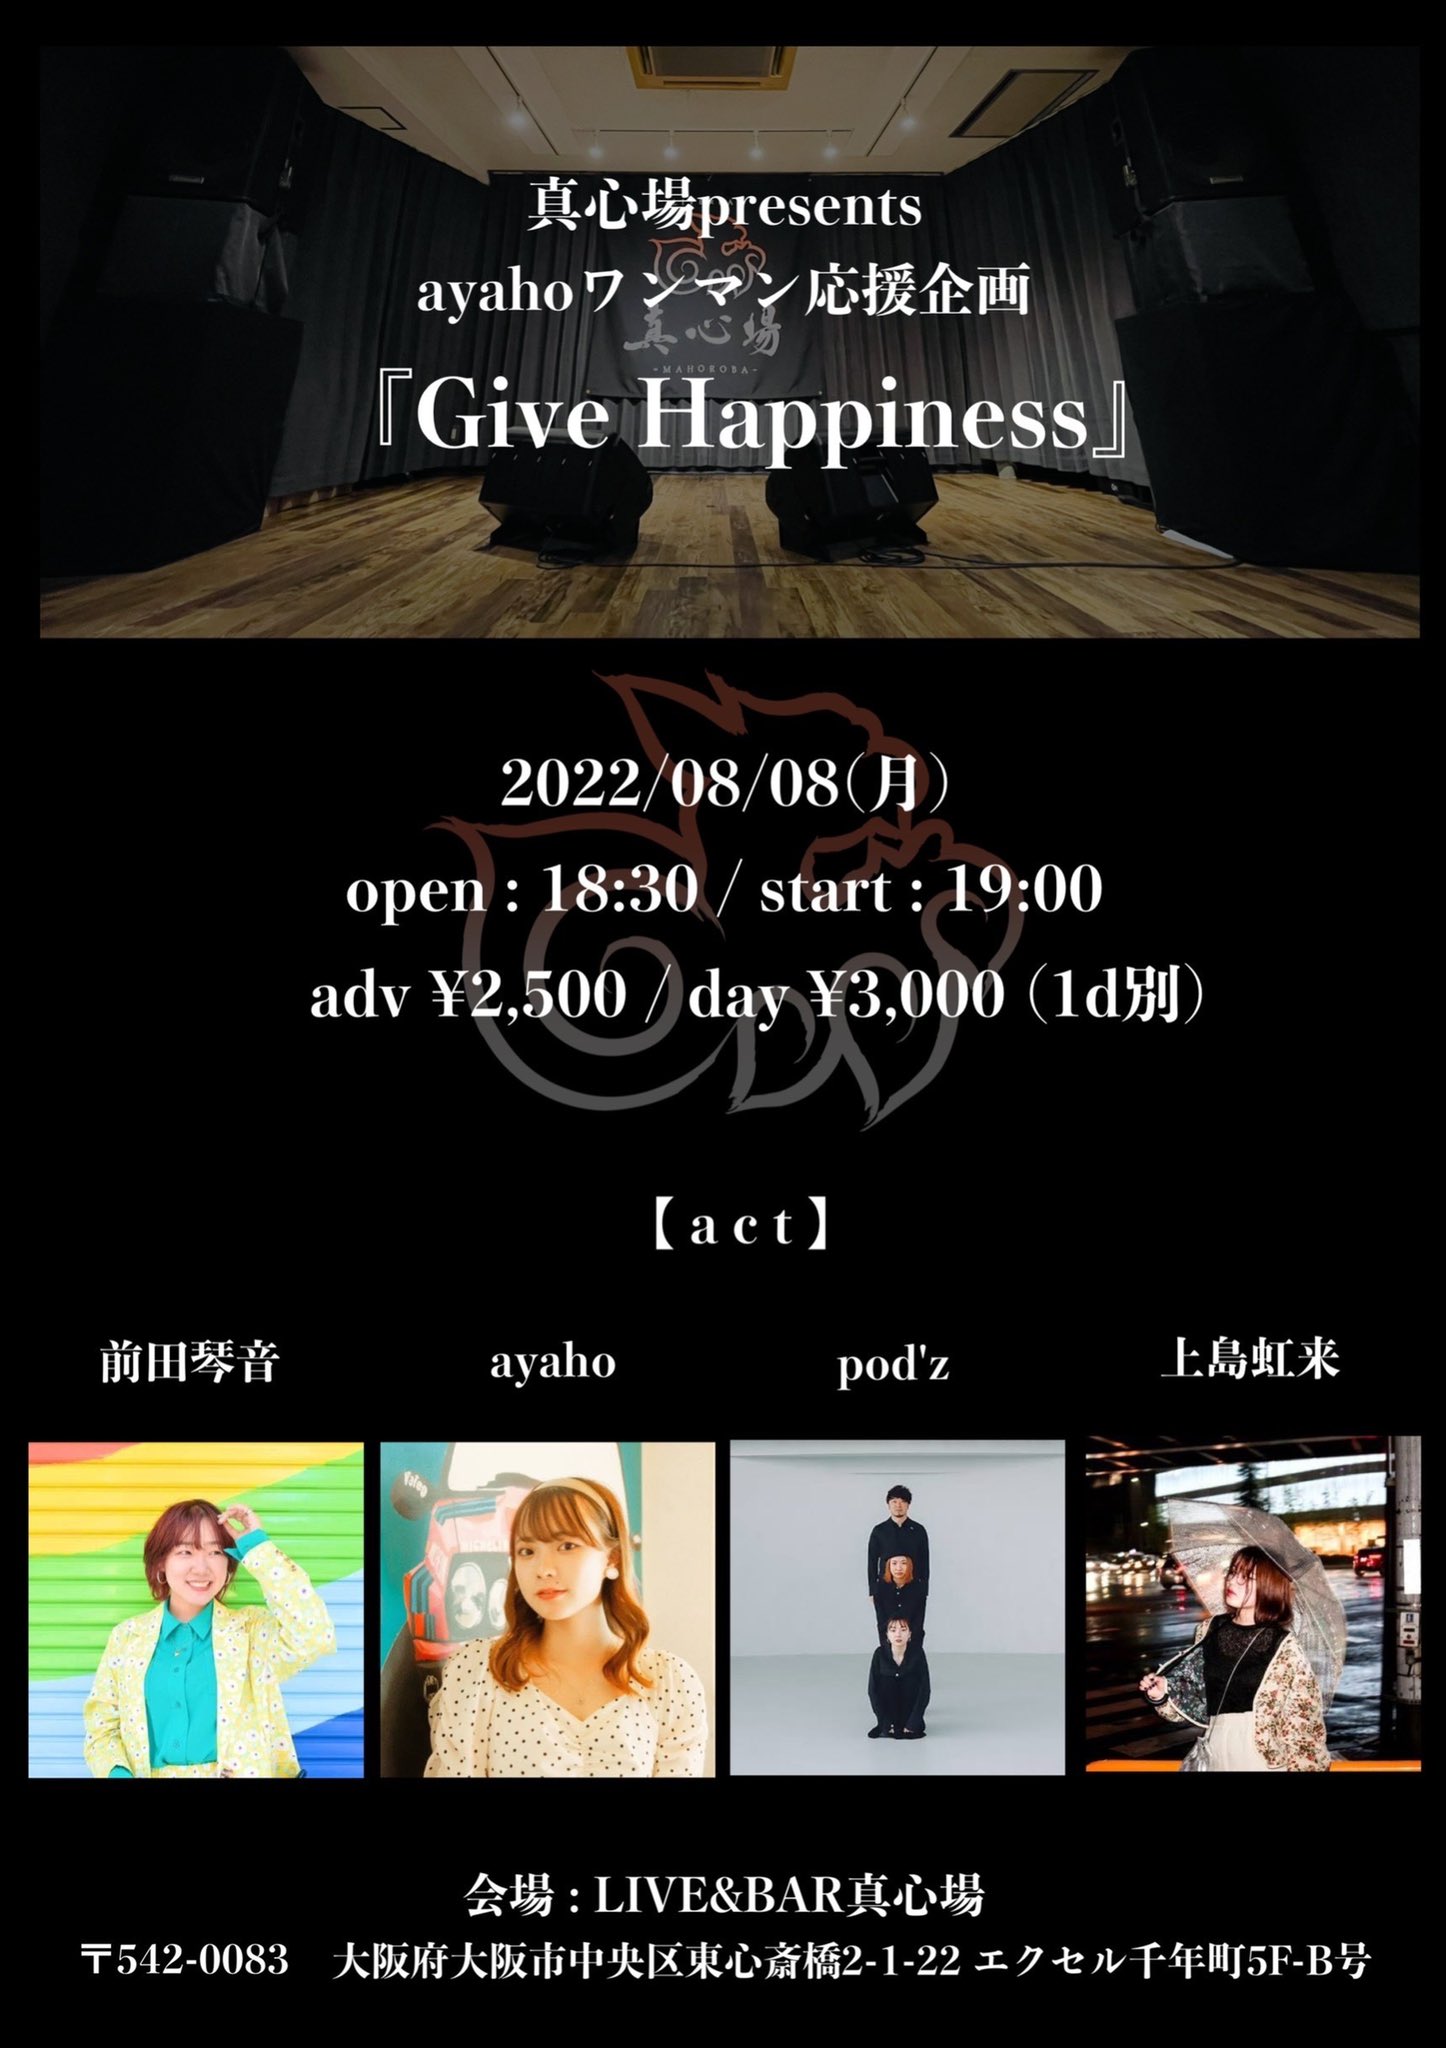 ayahoワンマン応援企画『Give Hppiness』